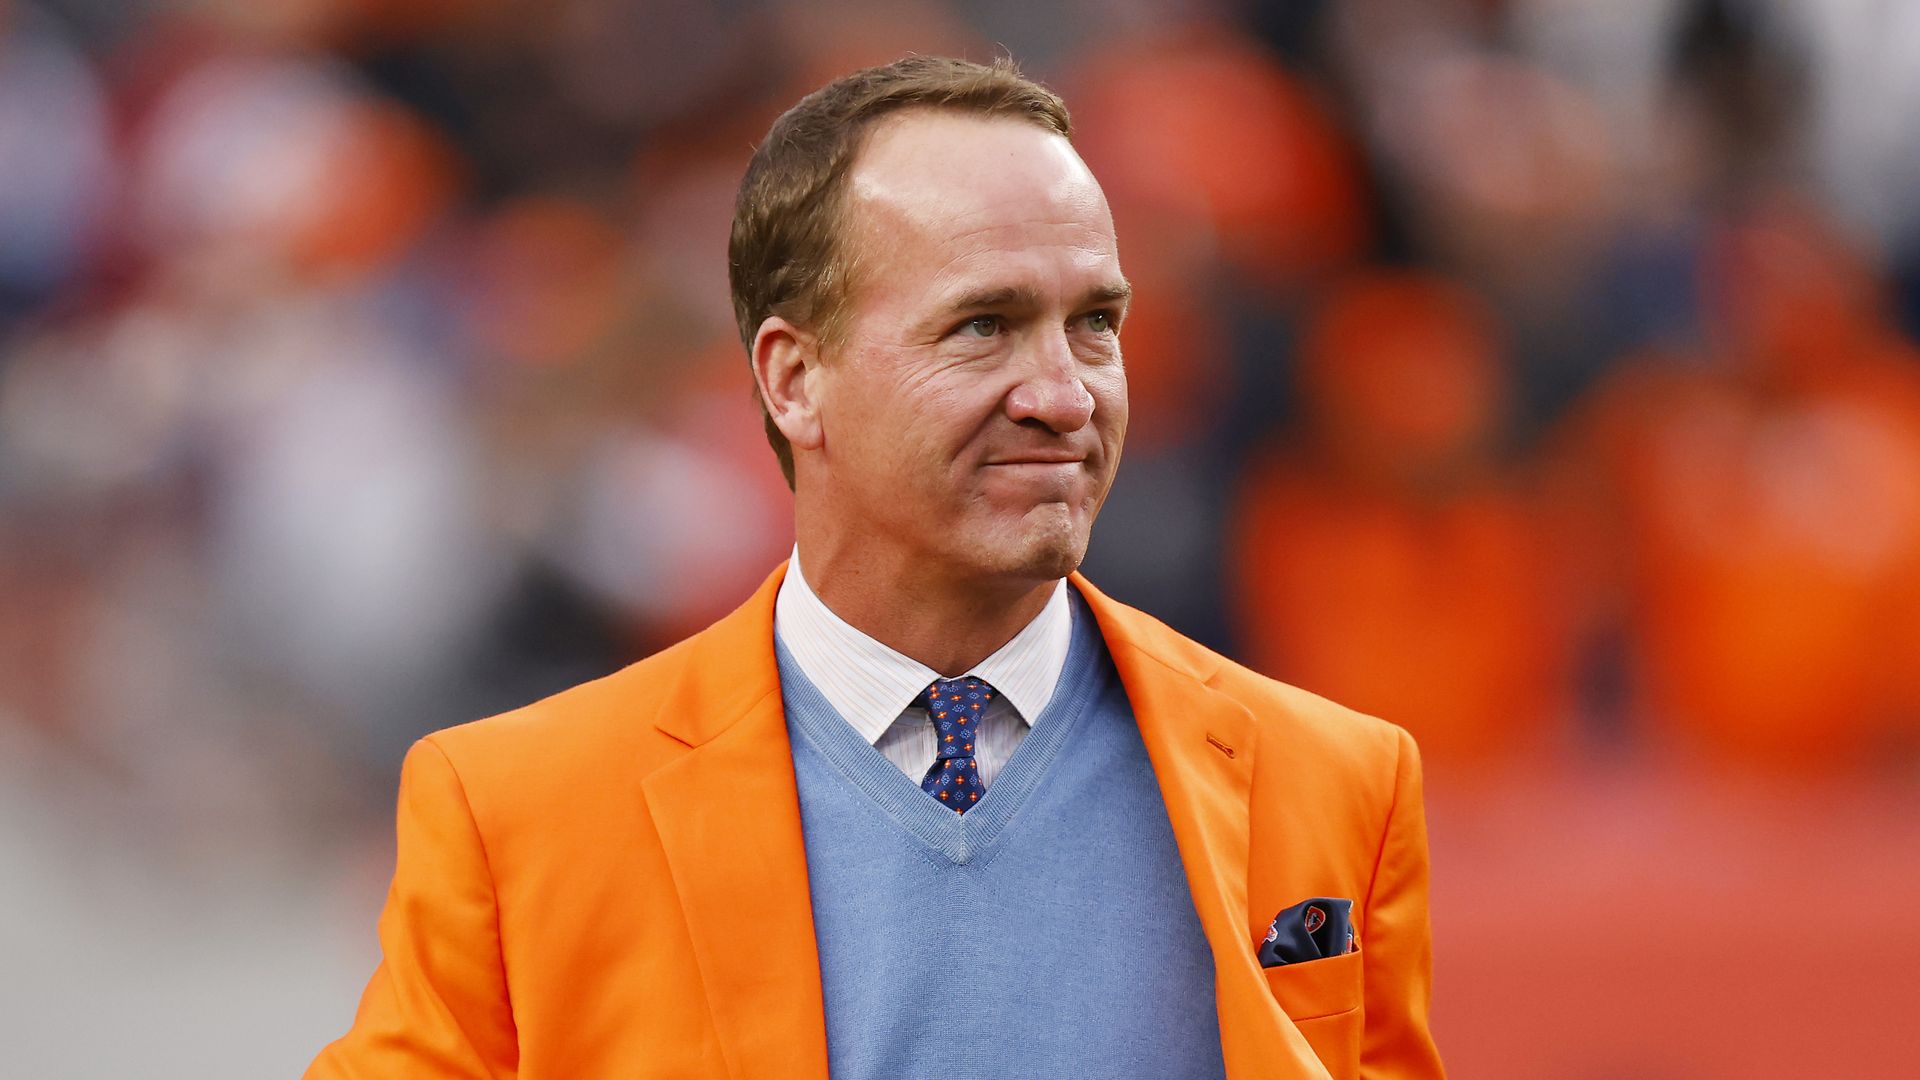 Peyton Manning at Empower Field At Mile High on Oct. 31, 2021. Photo: Justin Edmonds/Getty Images